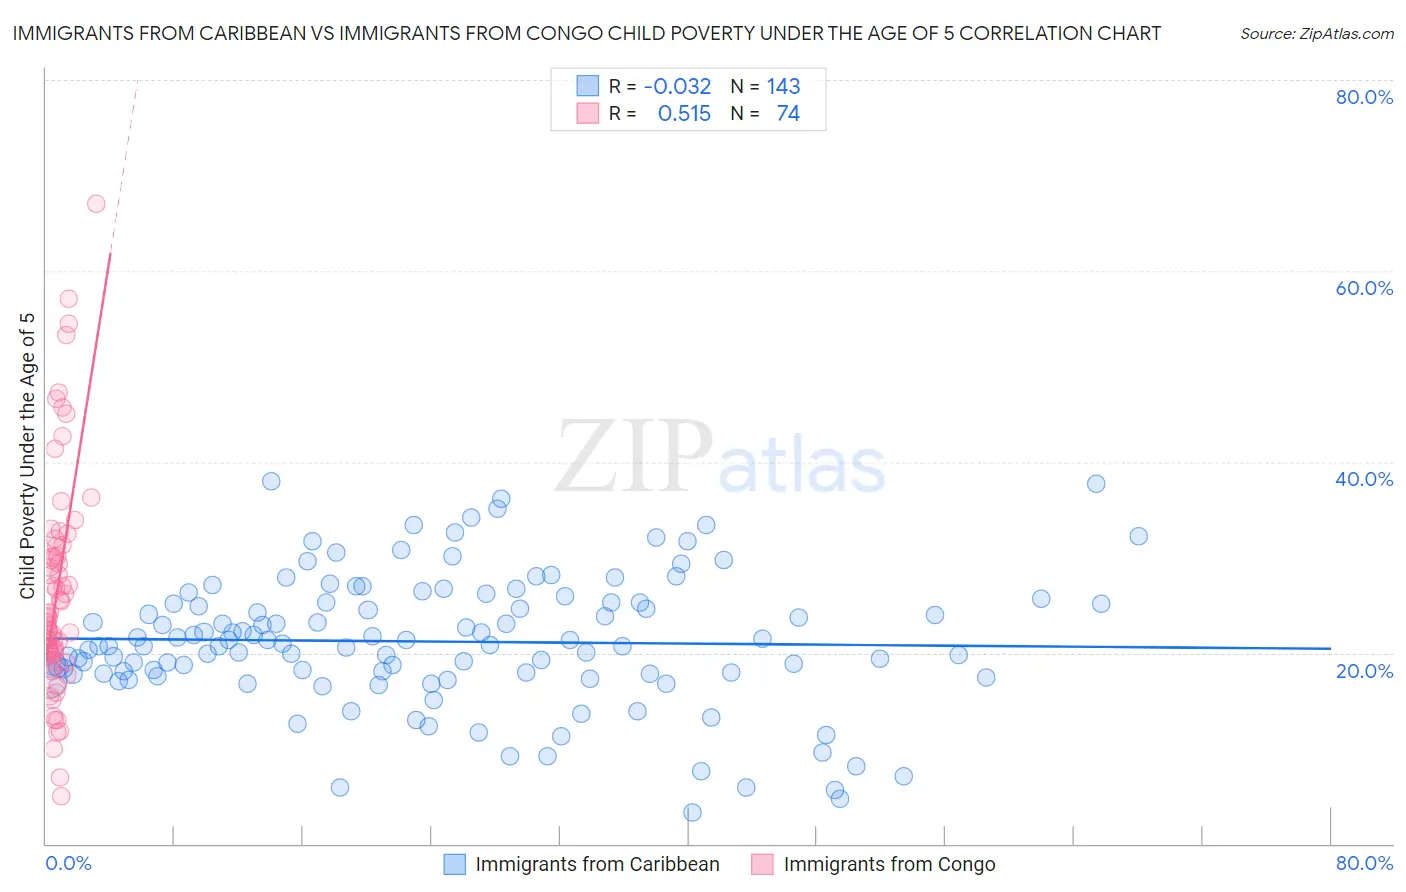 Immigrants from Caribbean vs Immigrants from Congo Child Poverty Under the Age of 5